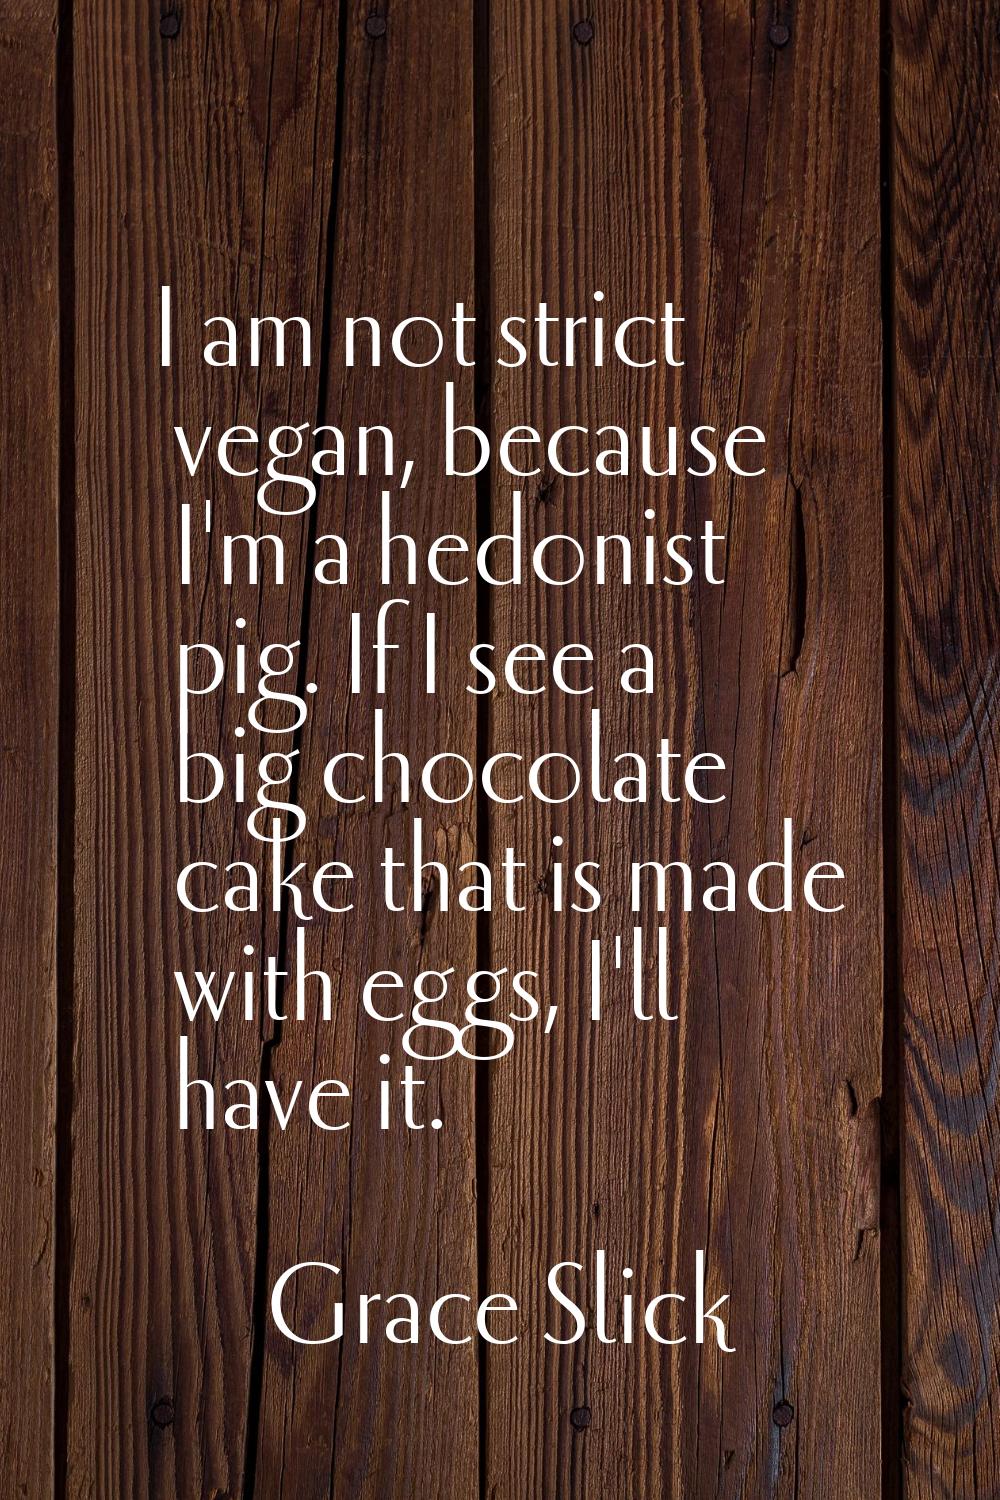 I am not strict vegan, because I'm a hedonist pig. If I see a big chocolate cake that is made with 